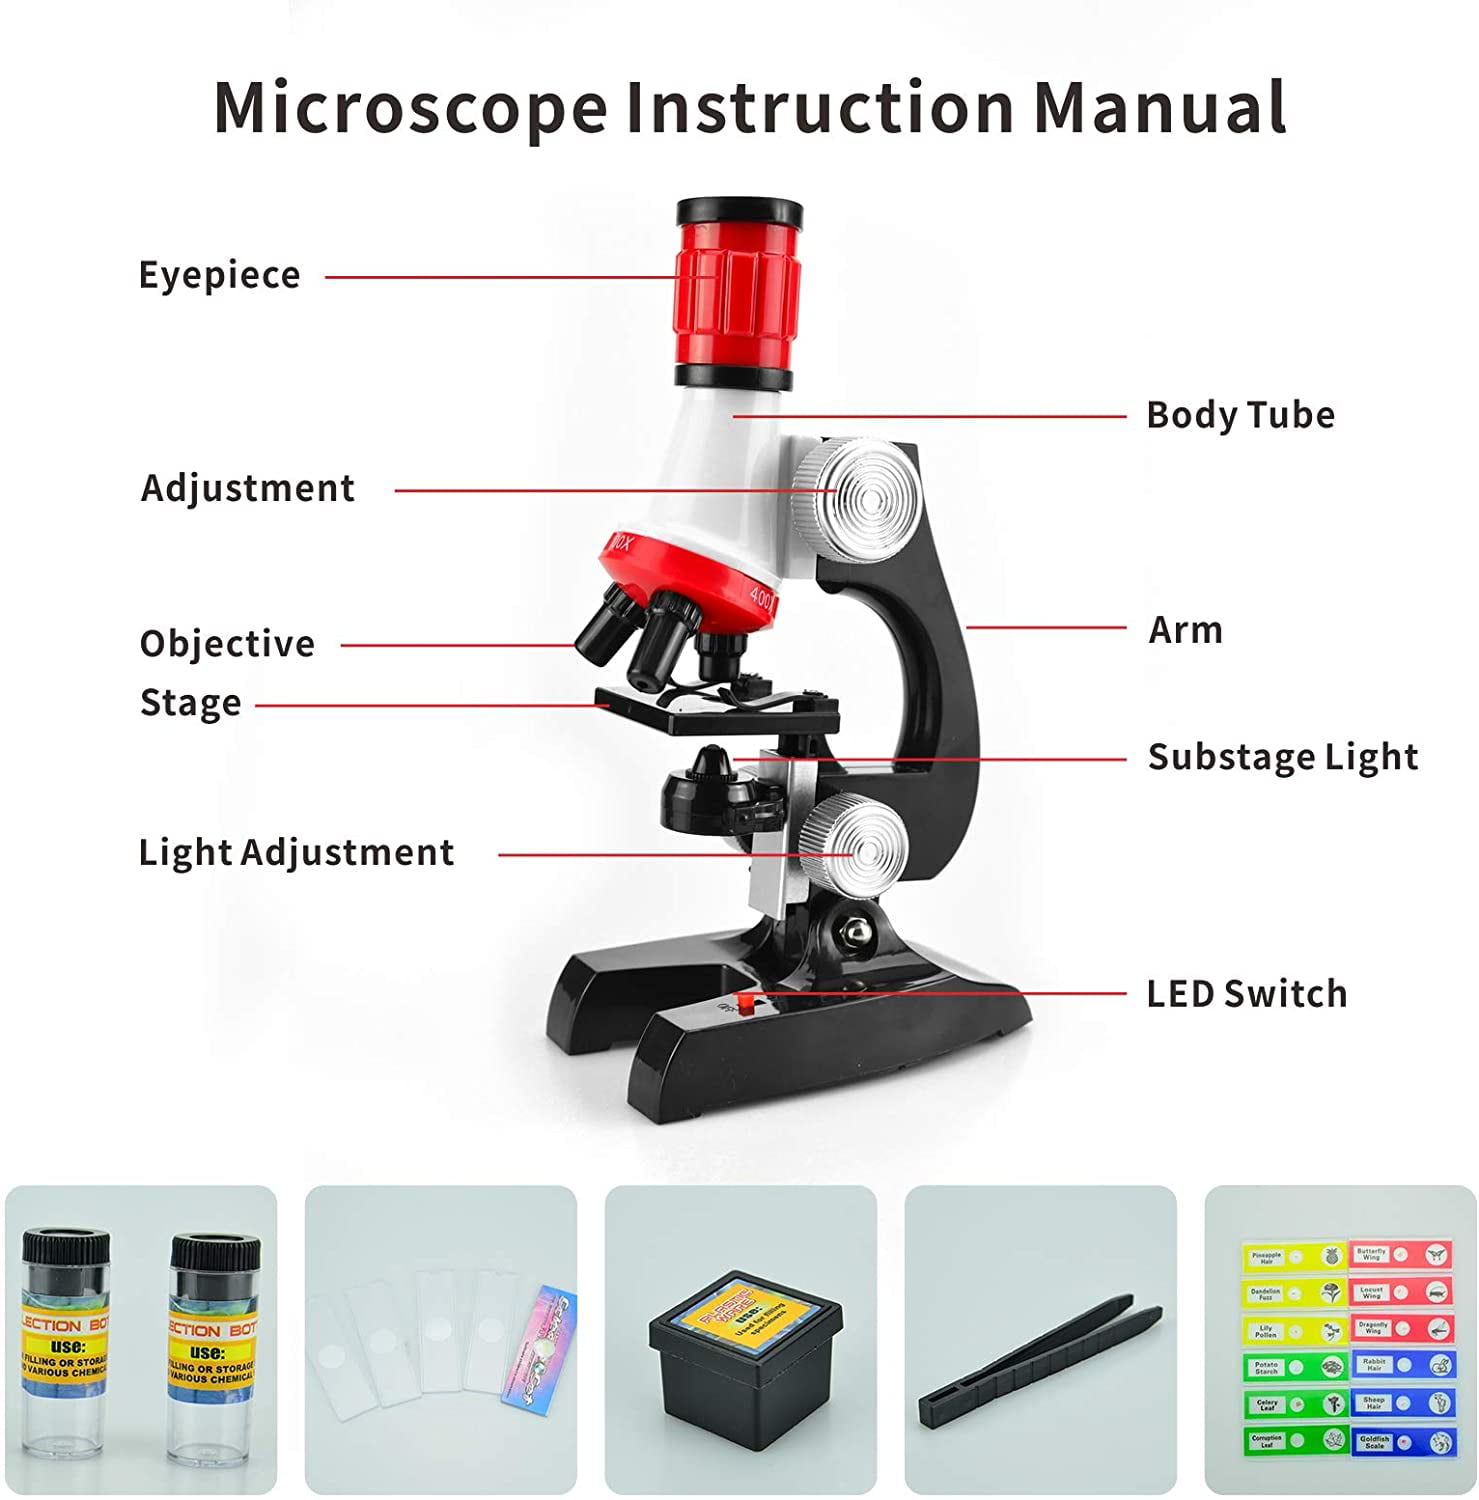 Educational Microscope Kit 1Life Science Microscope Kit Adjustable Kids Microscope Toy Set with LED 100x 400x 1200x Magnification for Beginners